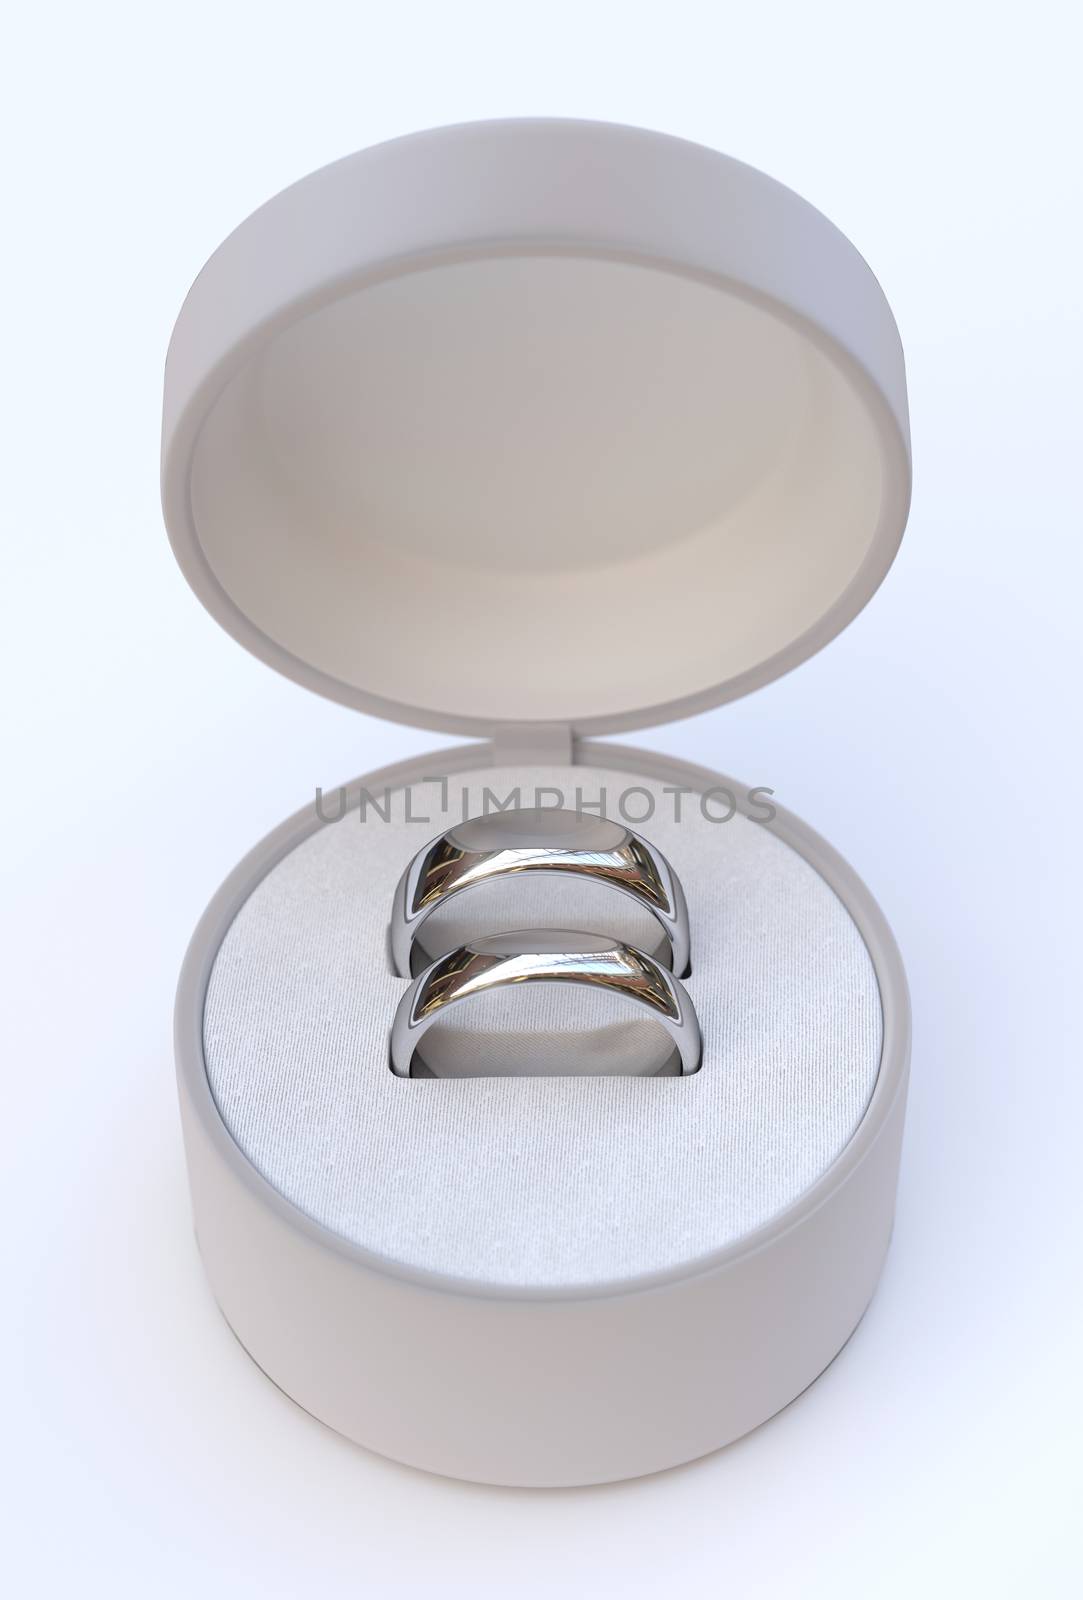 Couple of gold wedding rings  in jewelry white box  by Barbraford